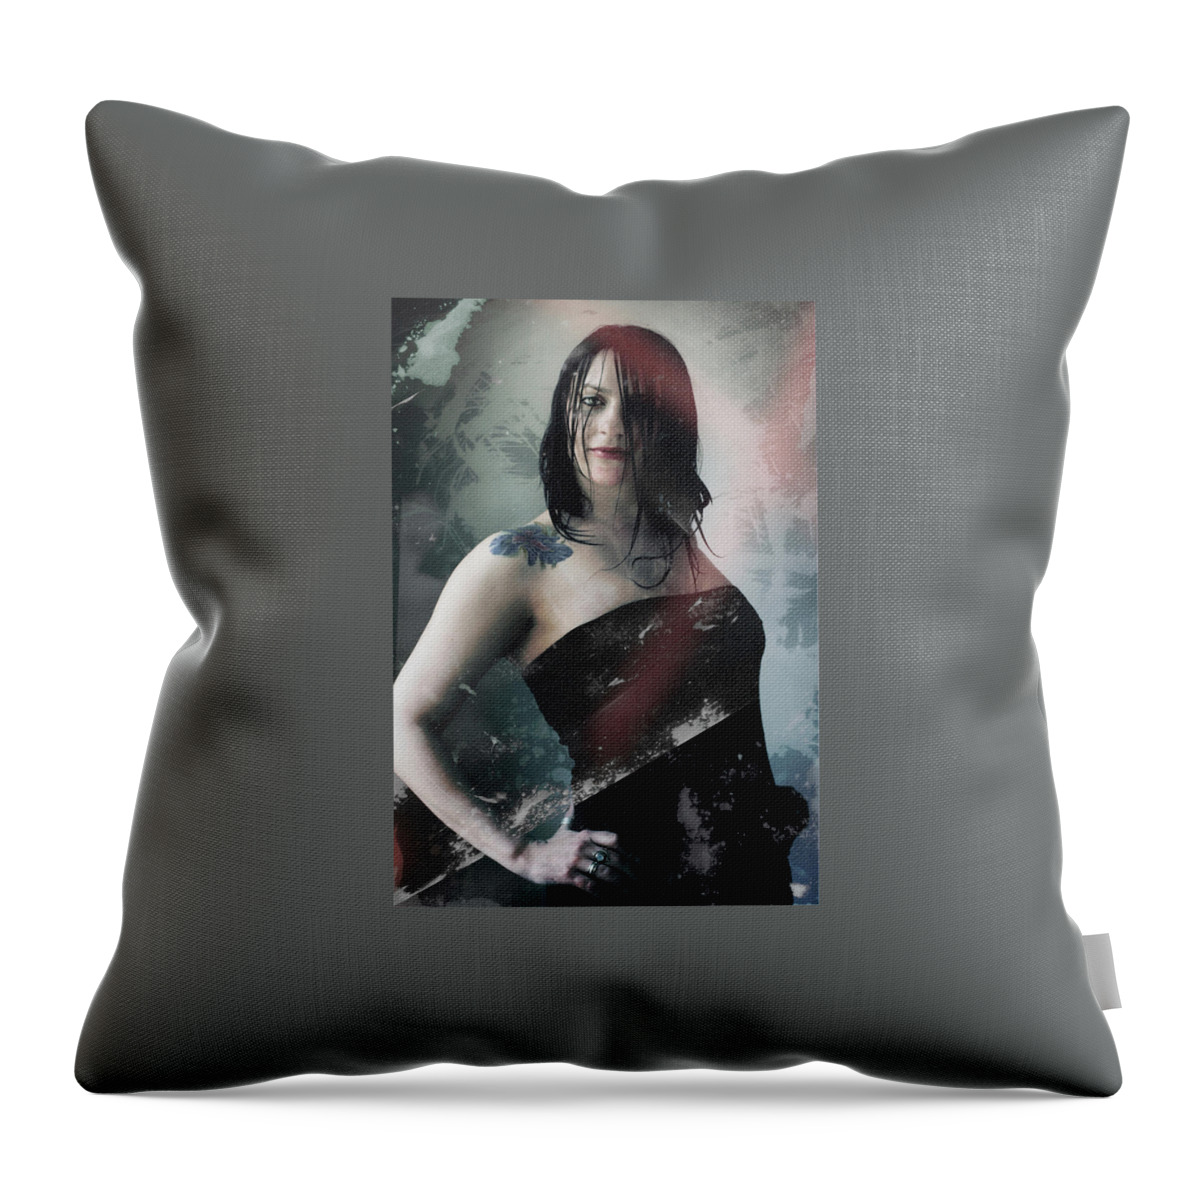 Artistic Throw Pillow featuring the photograph Artistic #1 by Mariel Mcmeeking